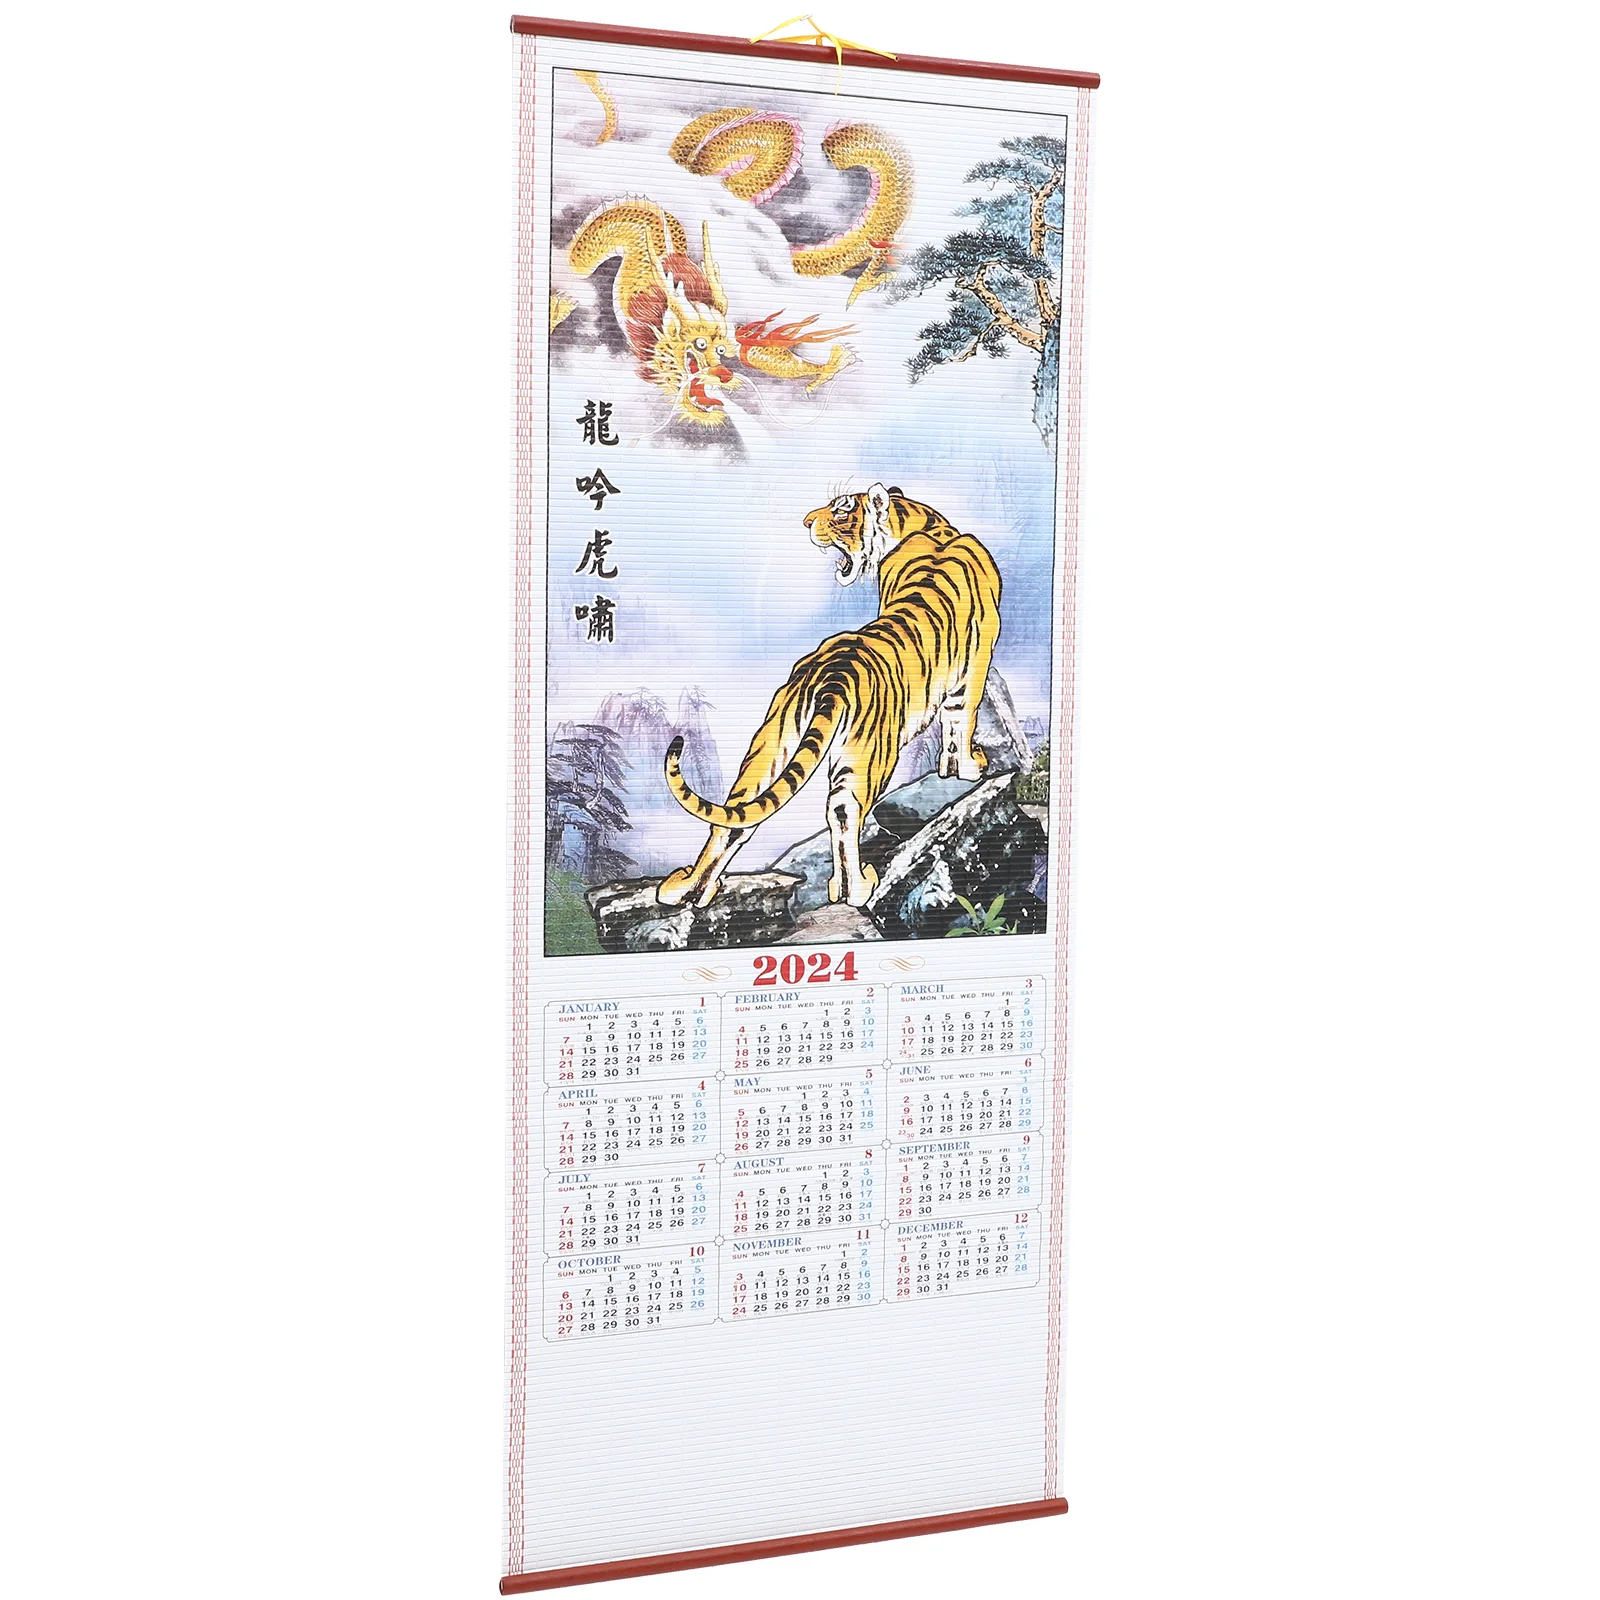 

Wall Calendar 2024 New Year Paper Decorative Paintings Calendars Living Room Decorations Office Dragon